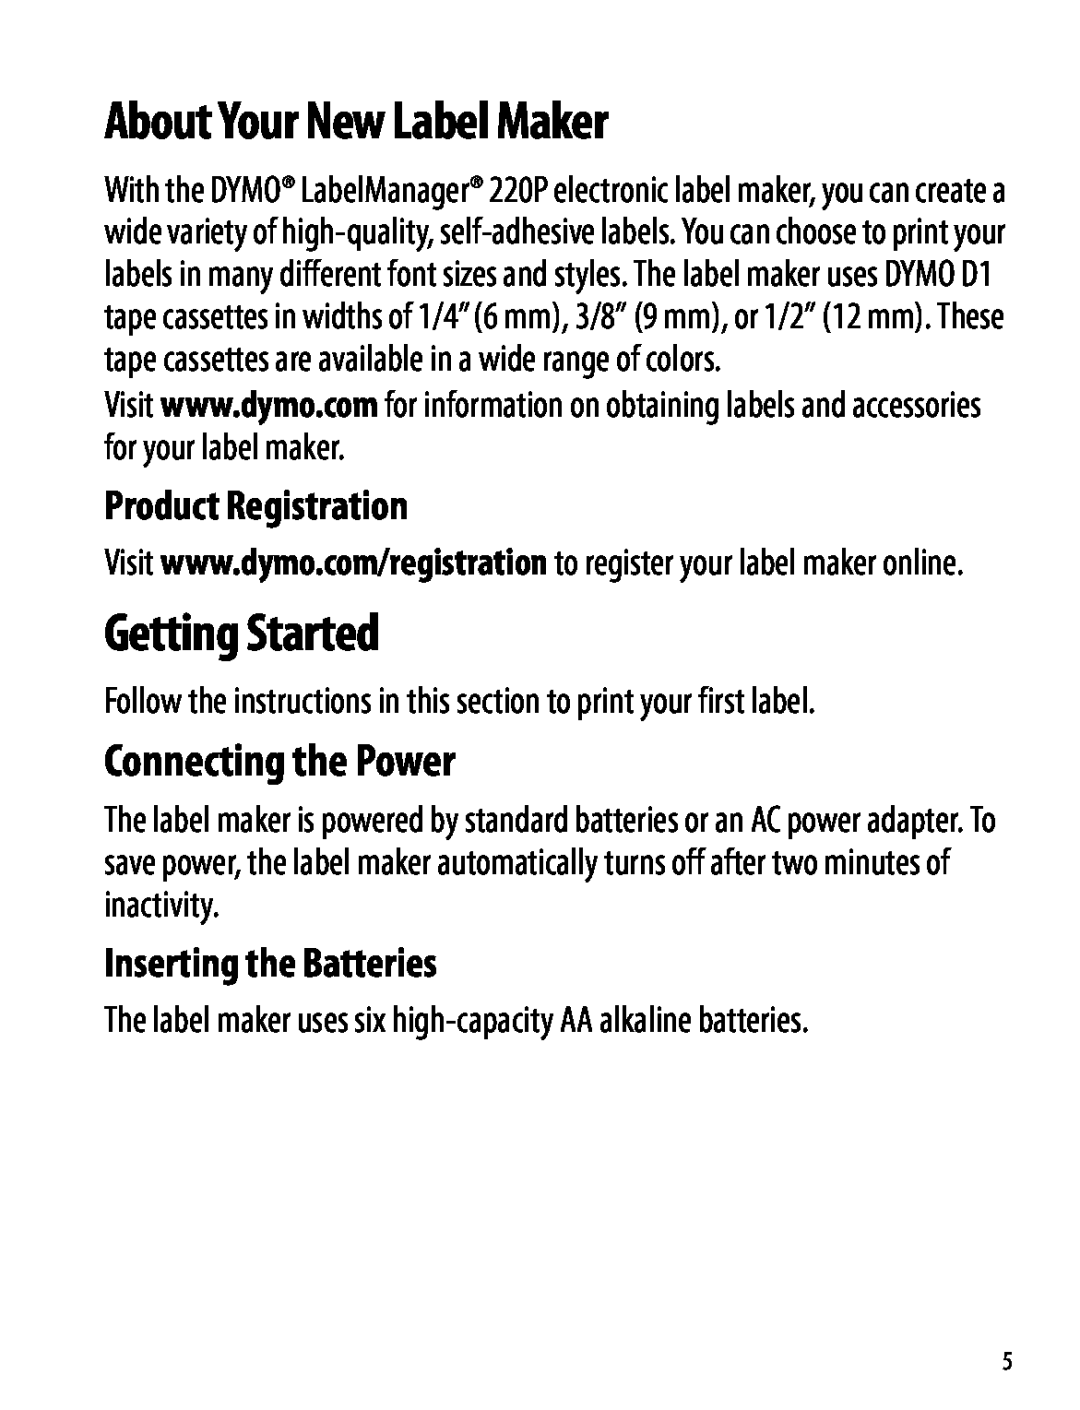 Dymo 220P About Your New Label Maker, Getting Started, Connecting the Power, Product Registration, Inserting the Batteries 